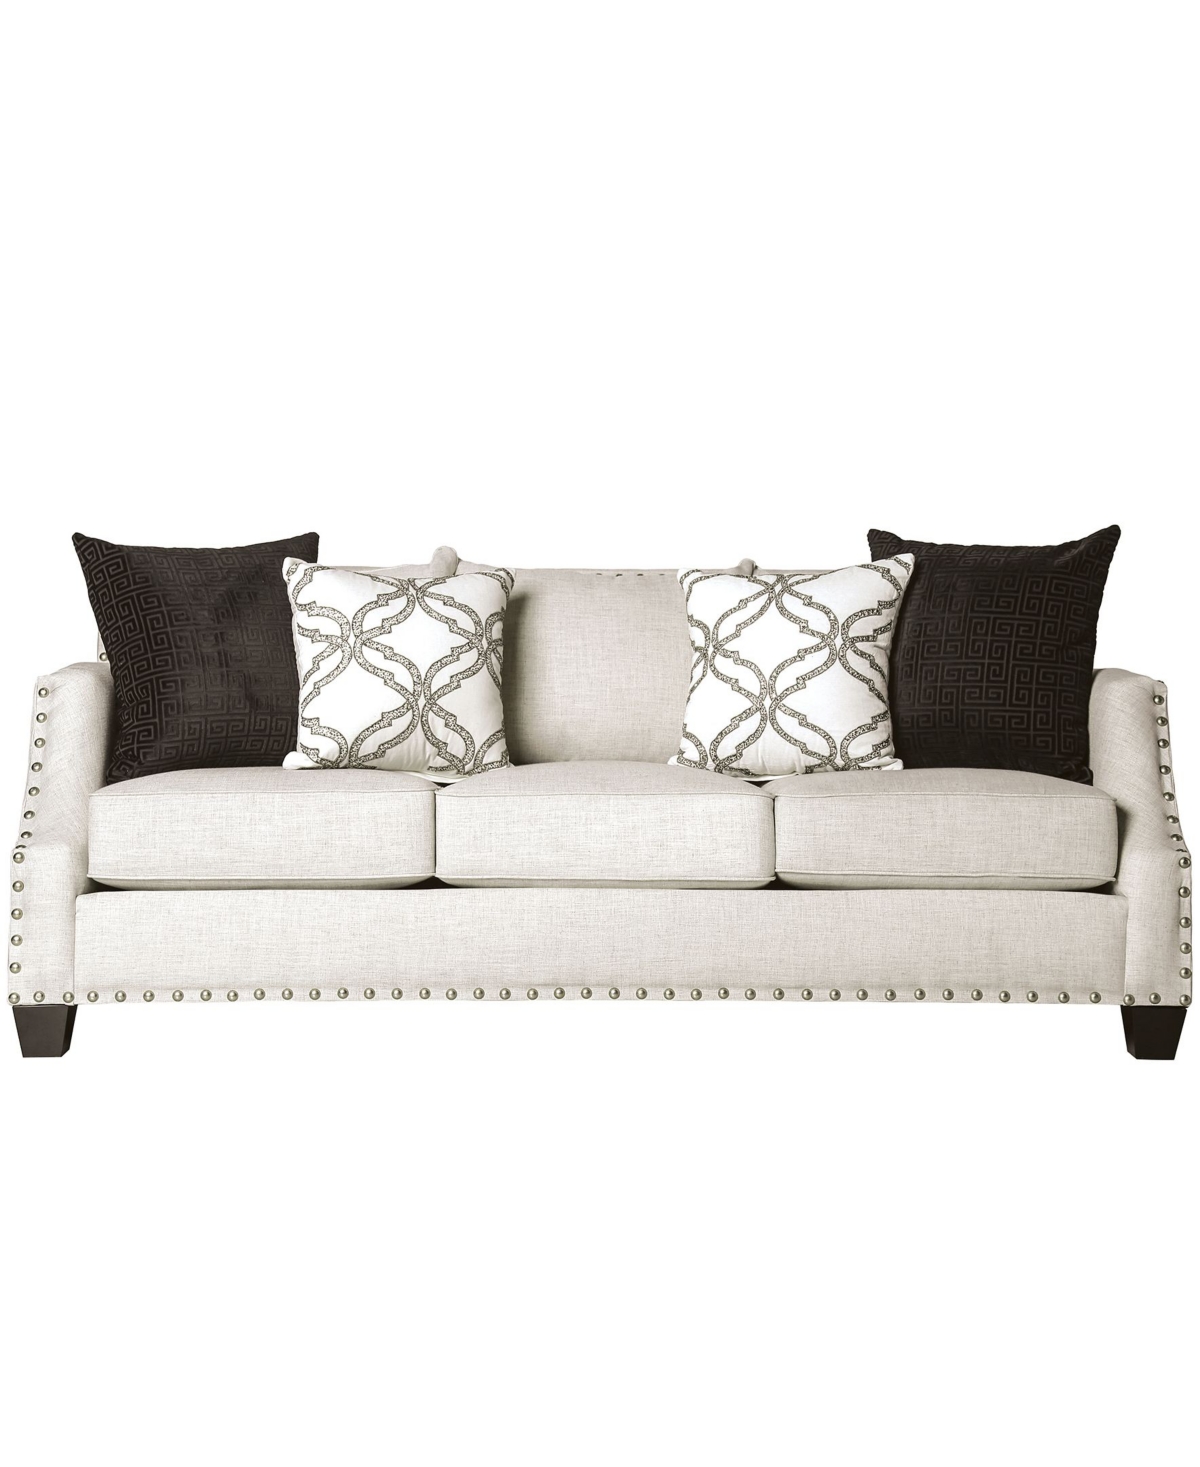 of America Melody Upholstered Sofa